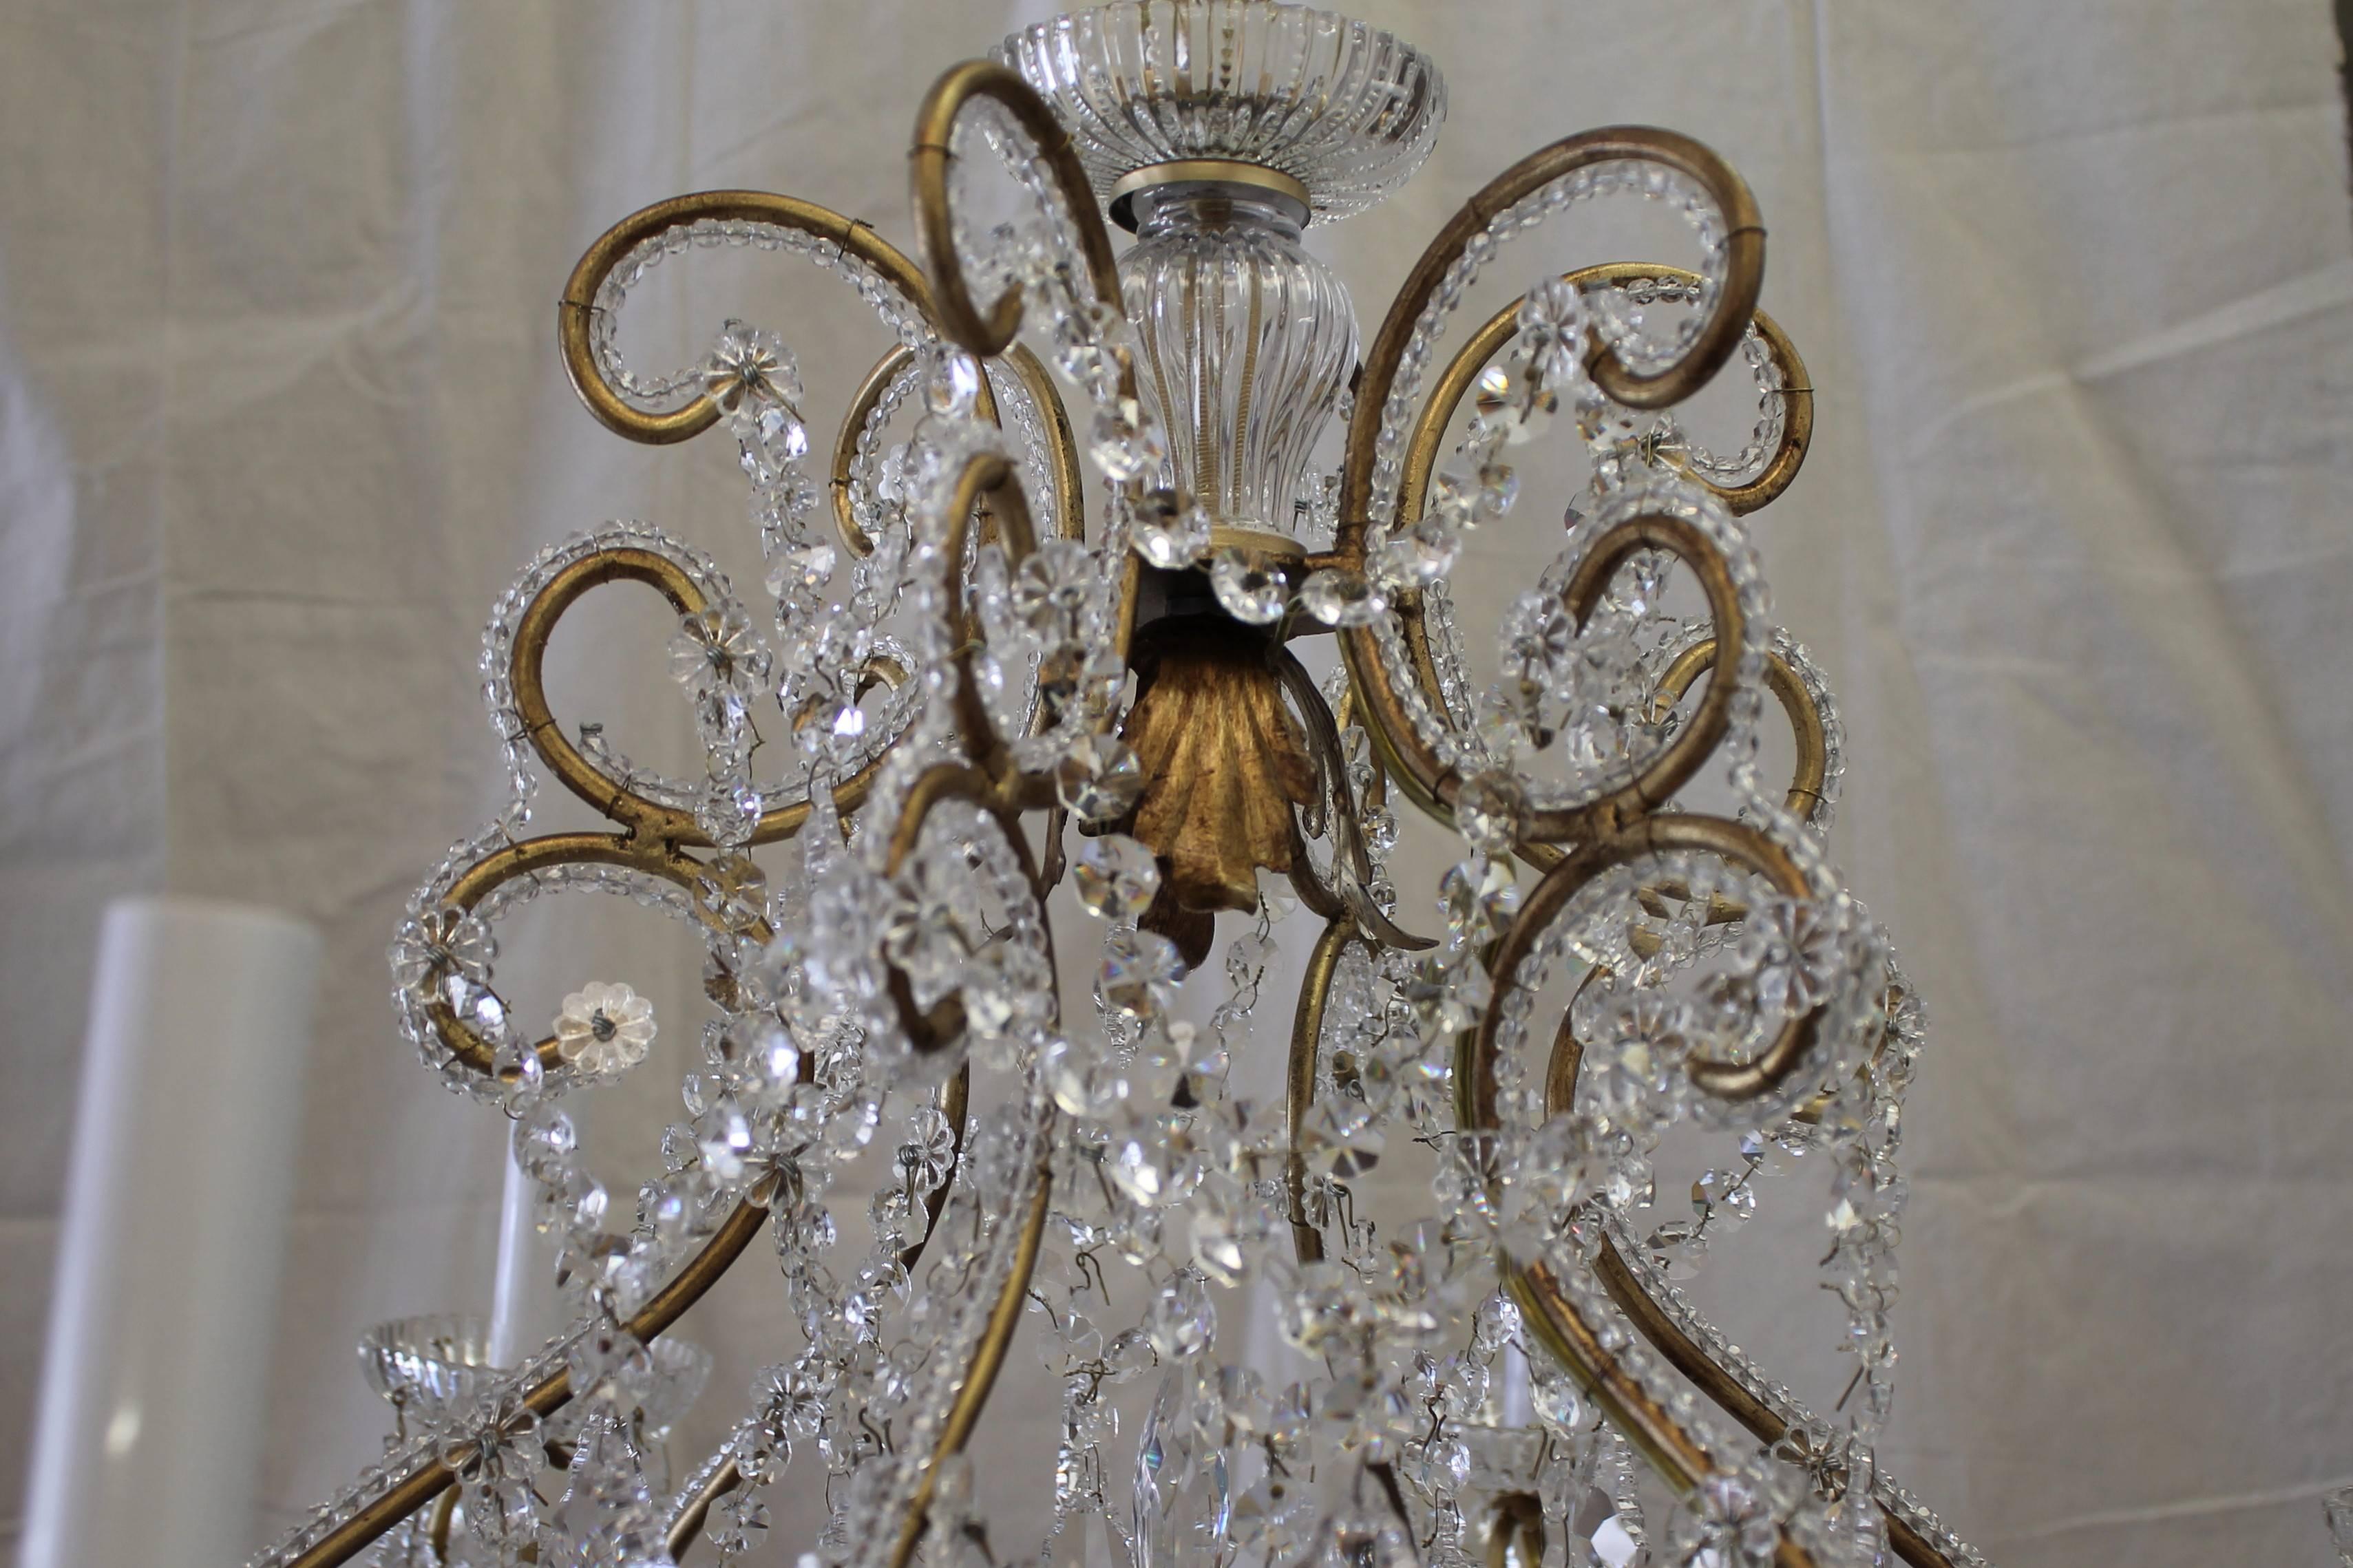 This is part of our own collection of reproduction chandeliers. Custom designed and made in Italy, our chandelier frame is painted in an antique gold, with beautiful French pendant crystals. The arms and frame are all beaded to give added sparkle.